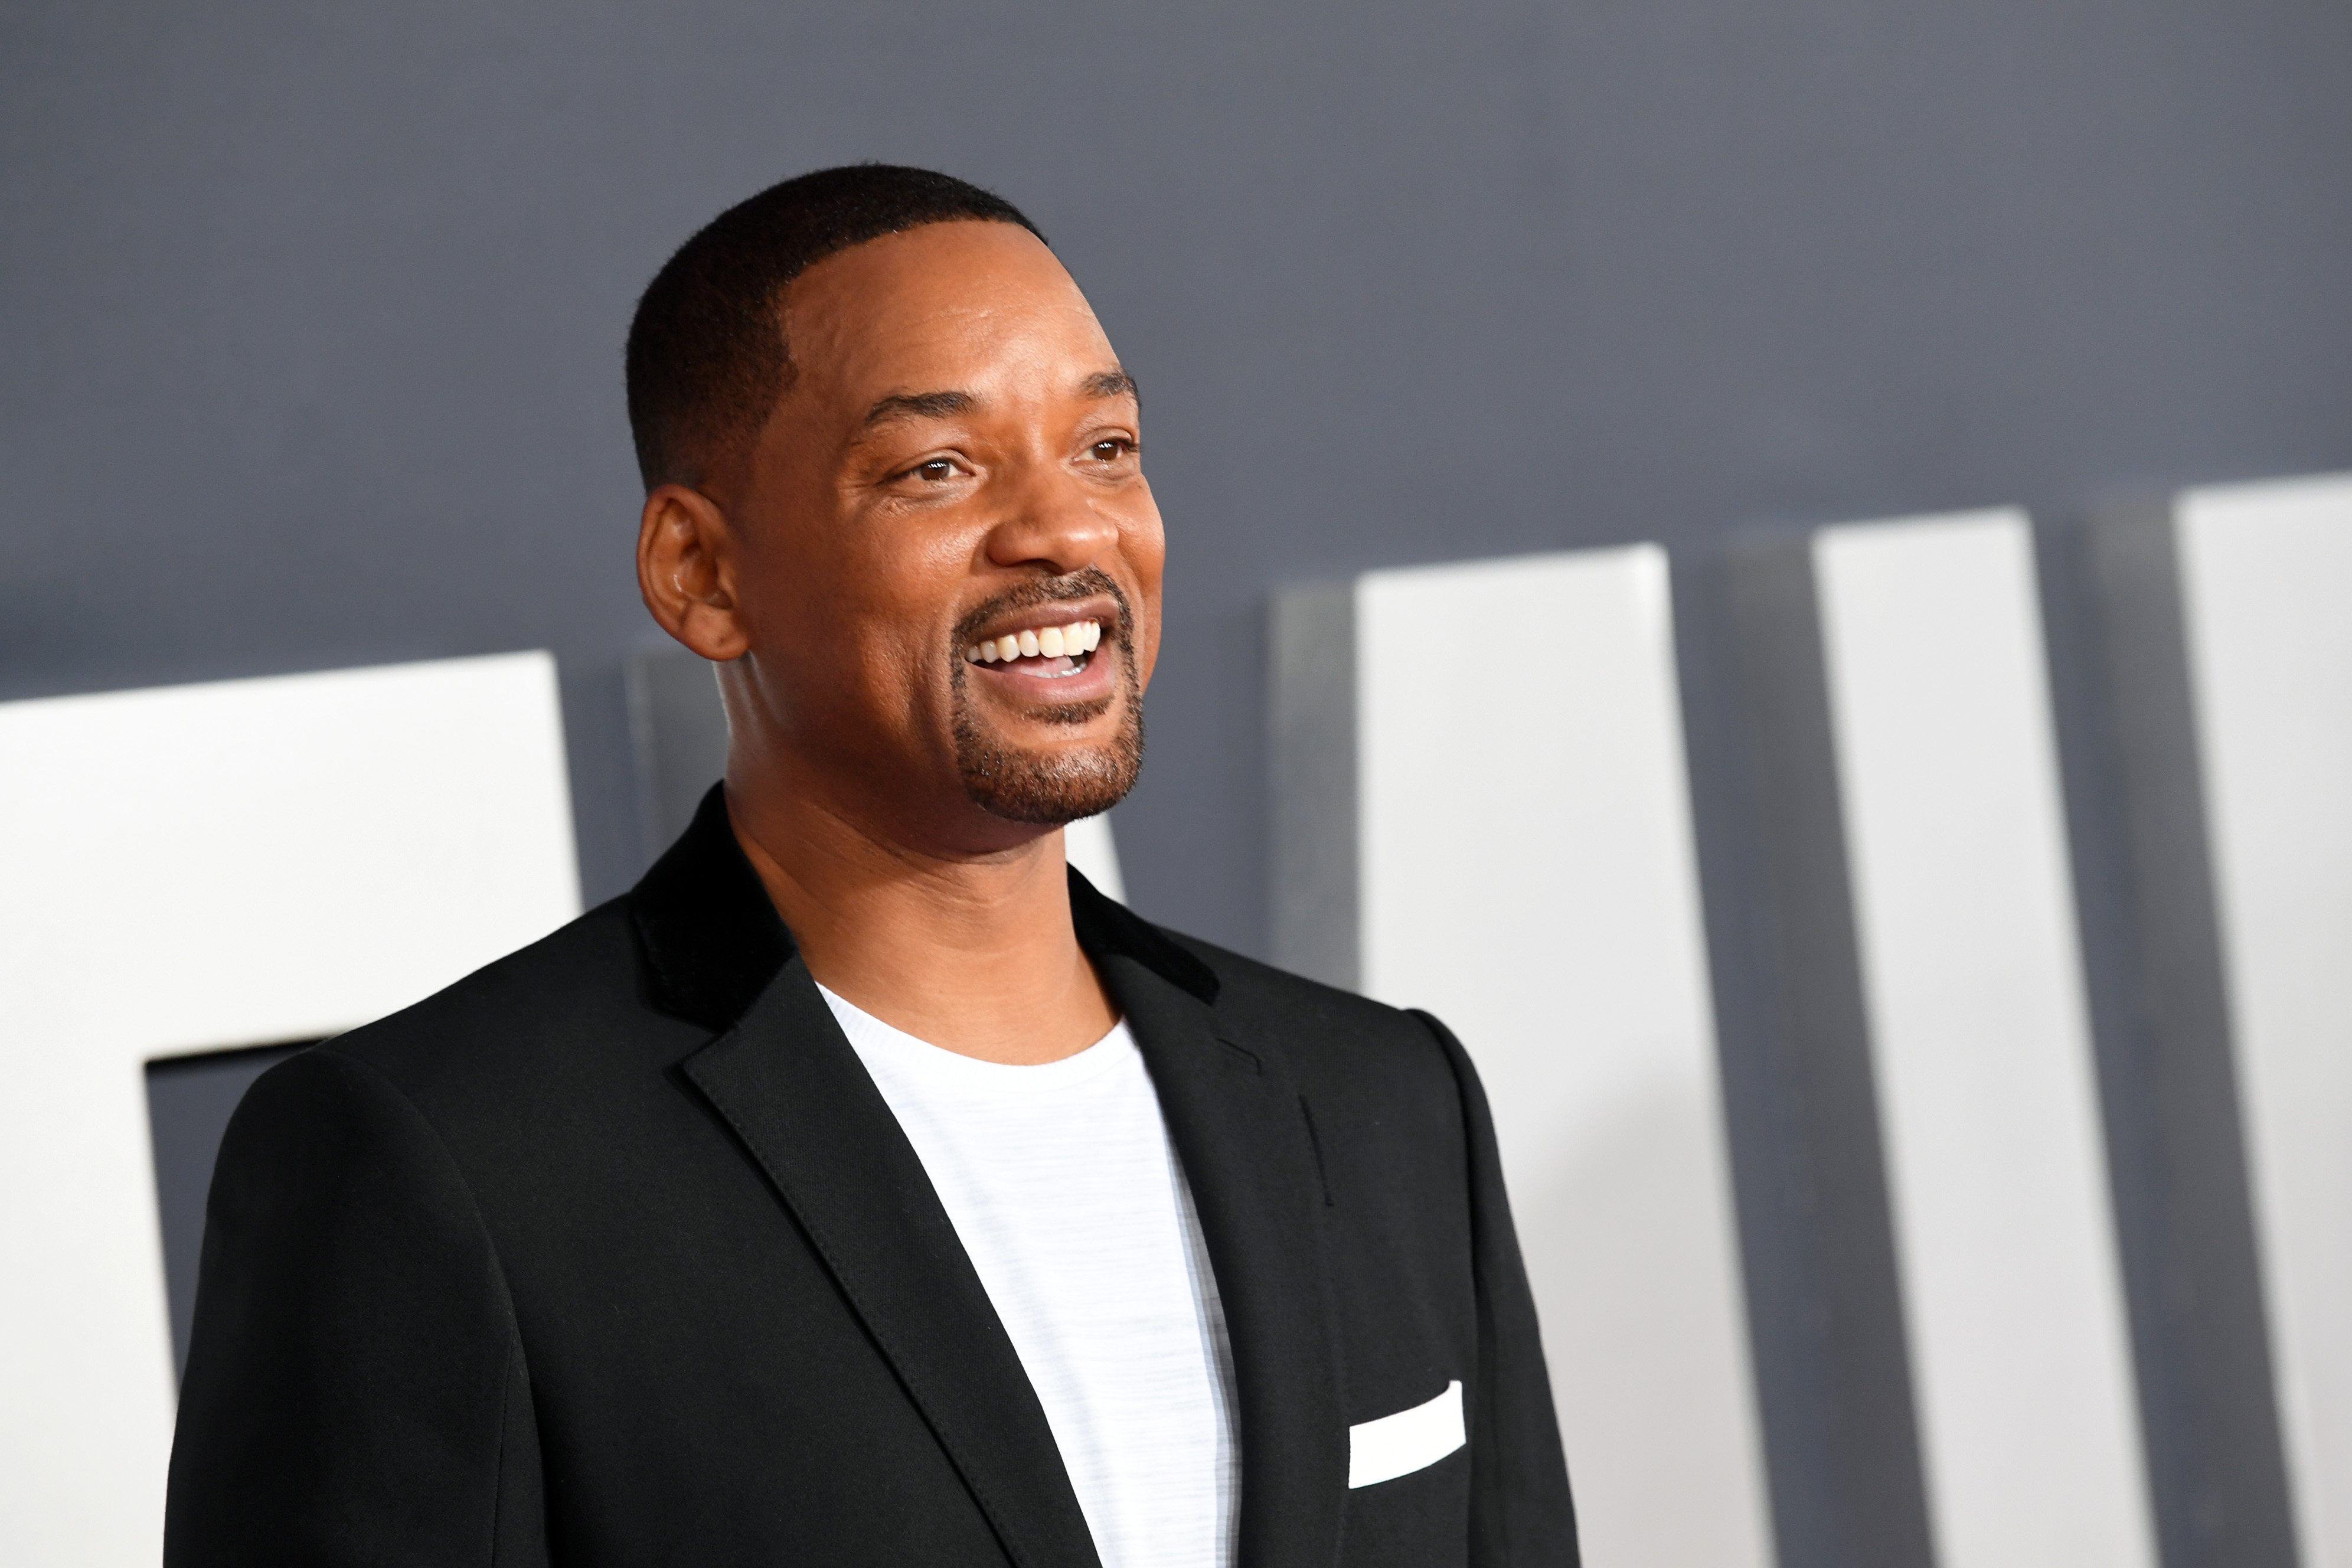 Will Smith attends Paramount Pictures' premiere of Gemini Man in 2019.